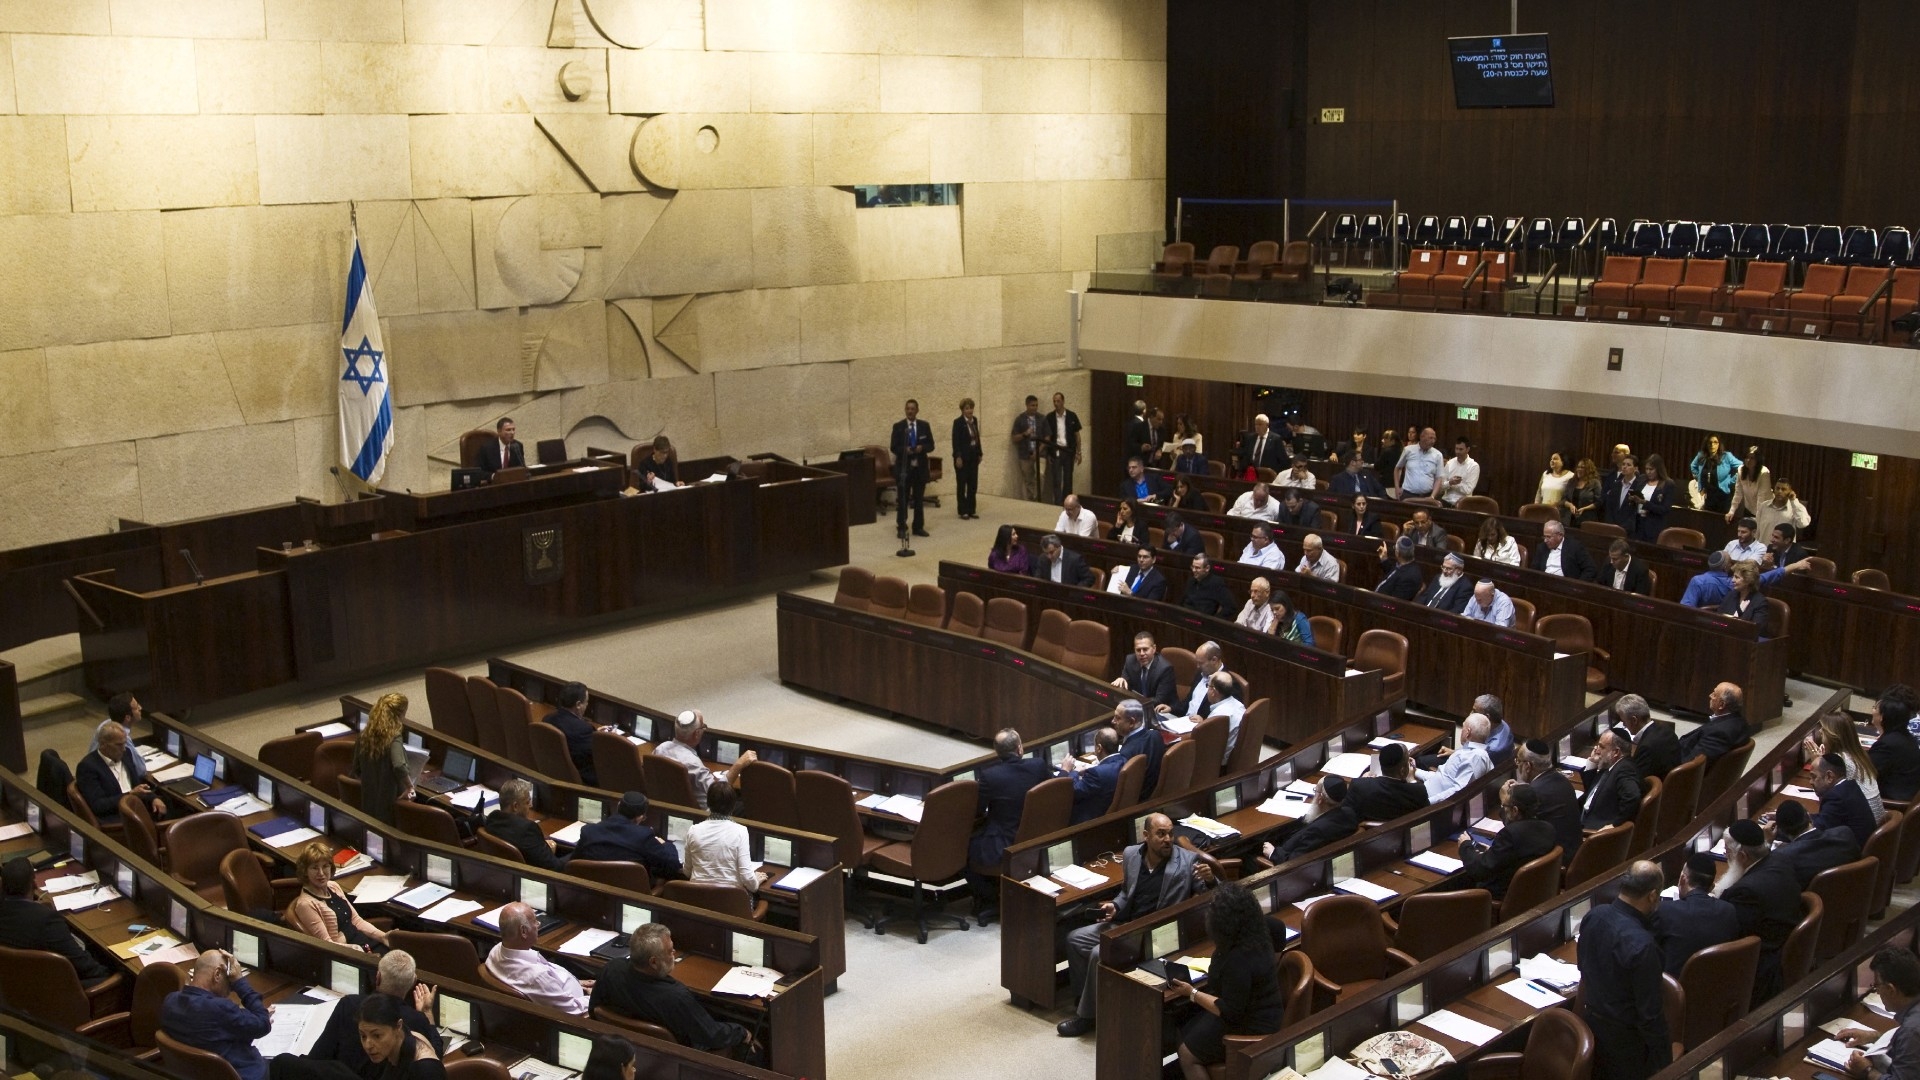 A general view shows the plenum during a session at the Knesset, the Israeli parliament, in Jerusalem May 13, 2015 (Reuters)